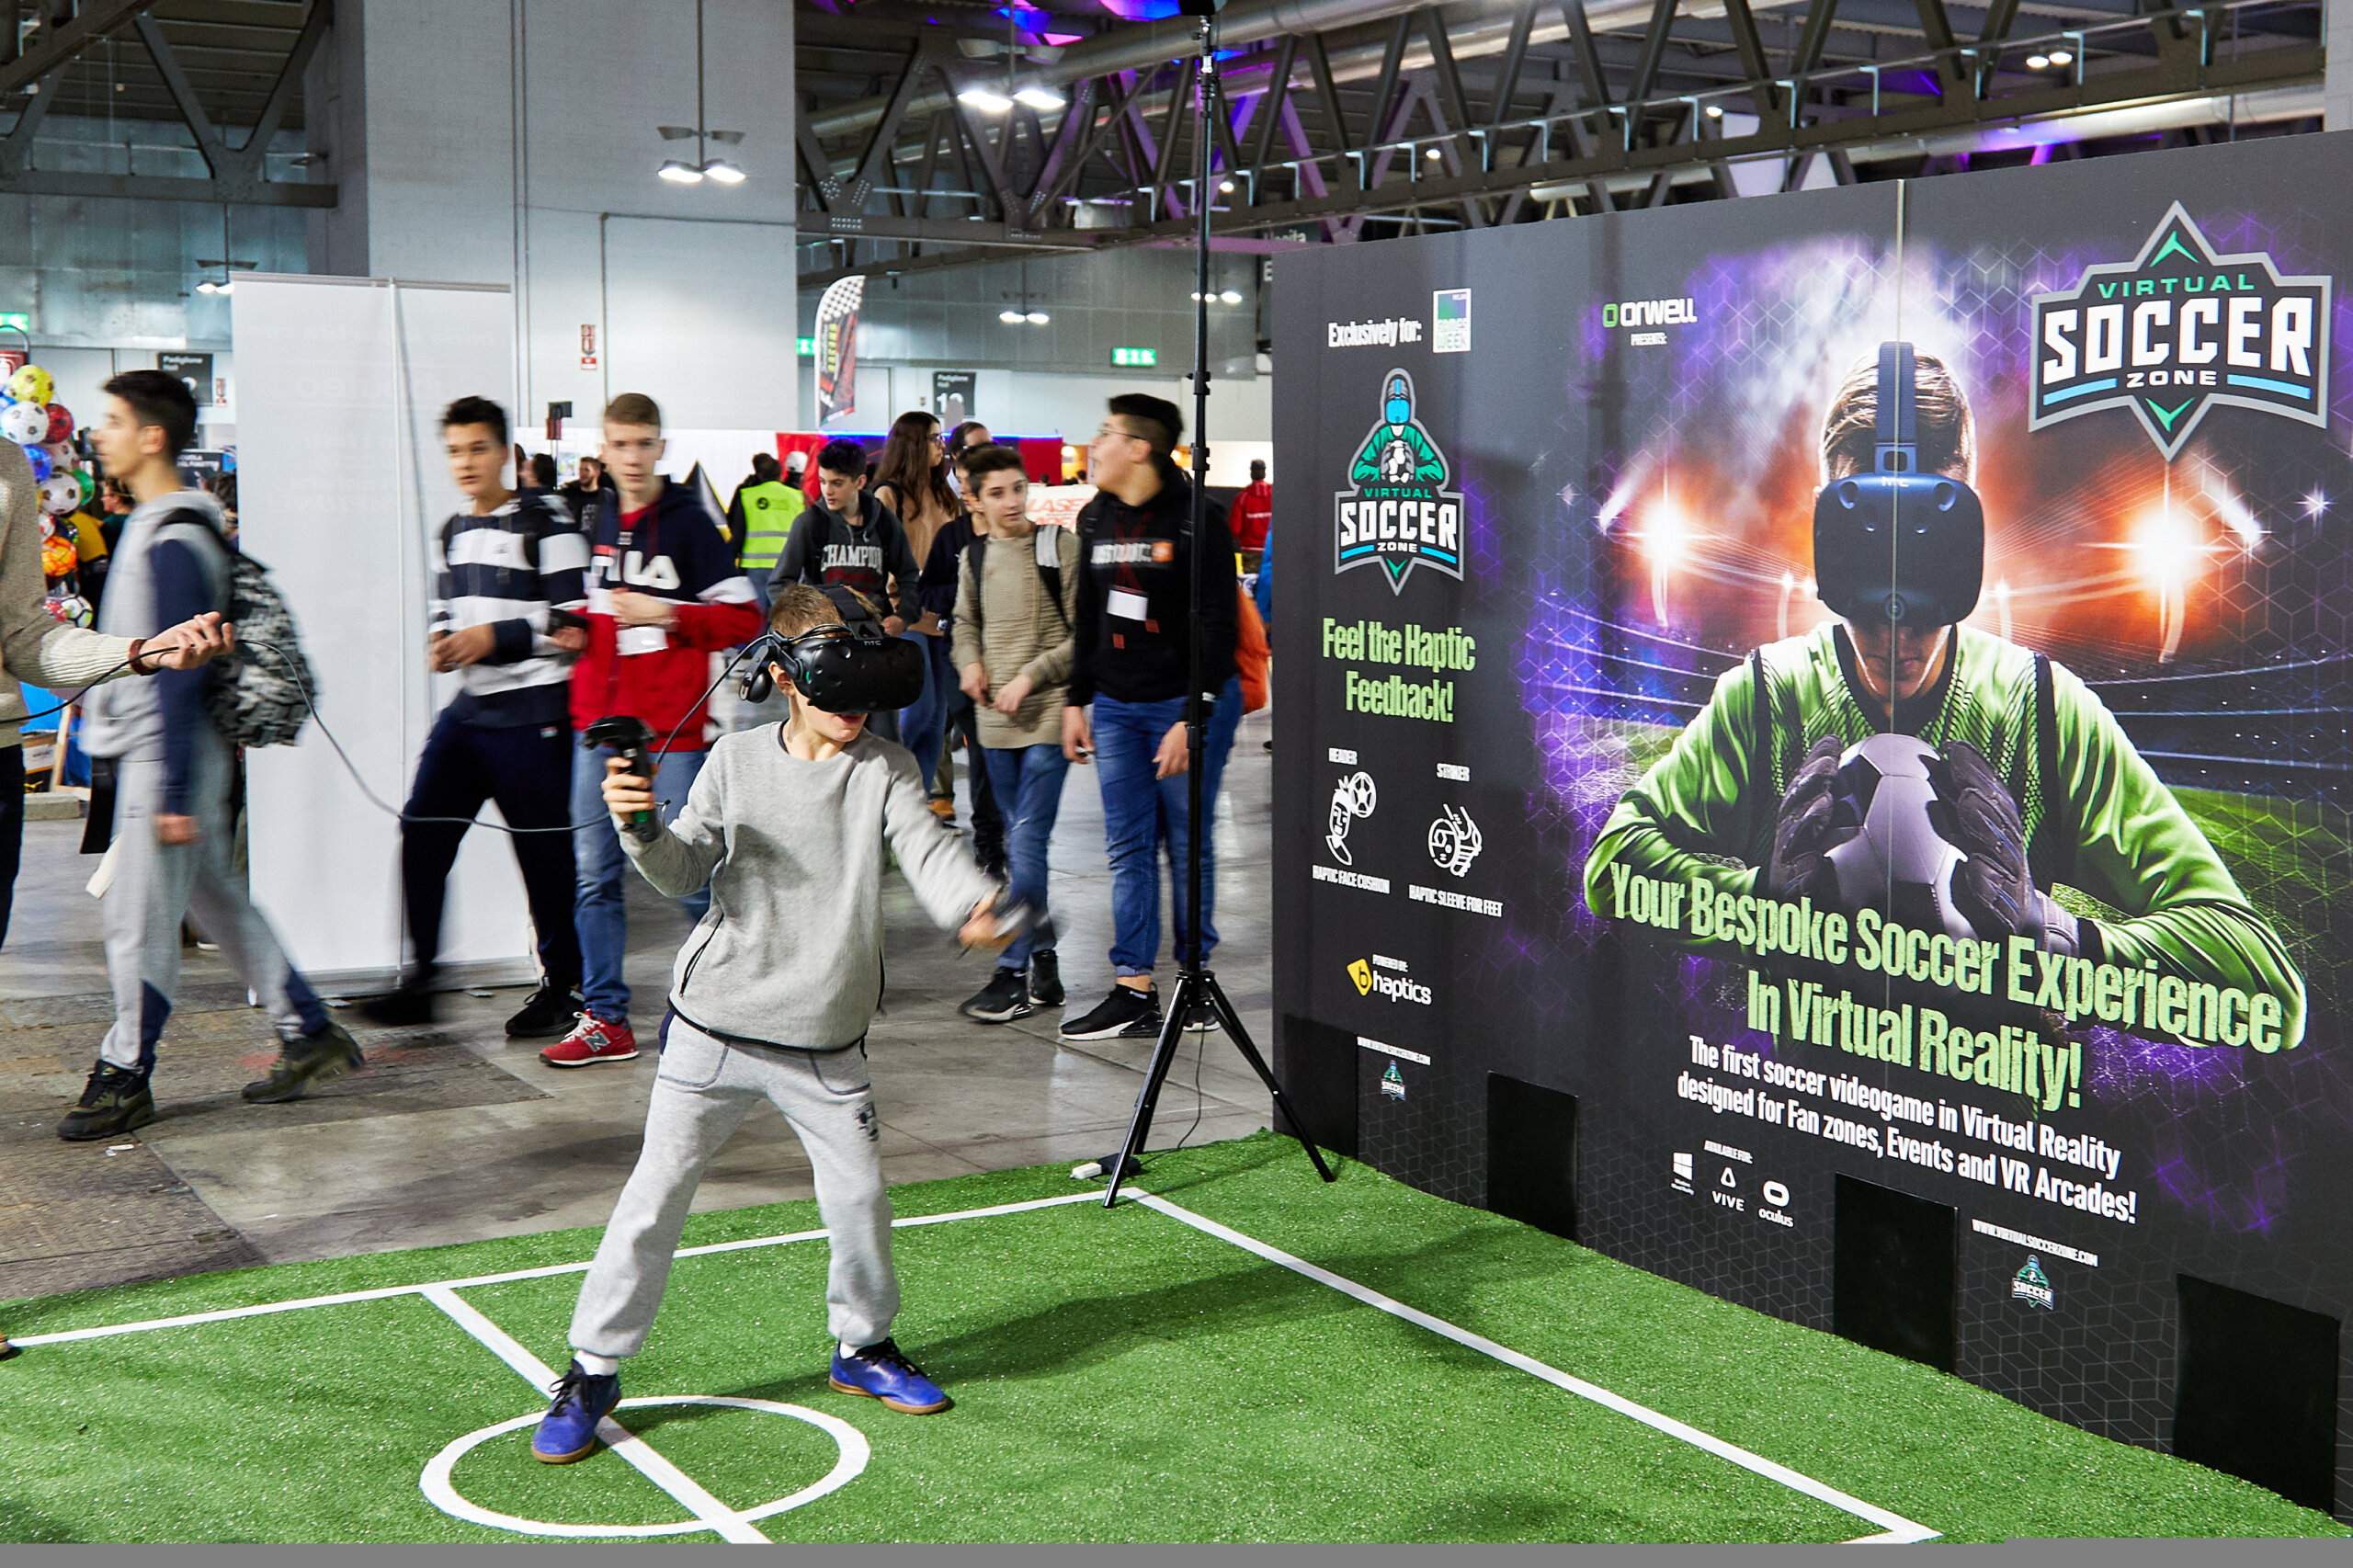 Insights from Barça Innovation Hub: How technology is revolutionizing the sports industry